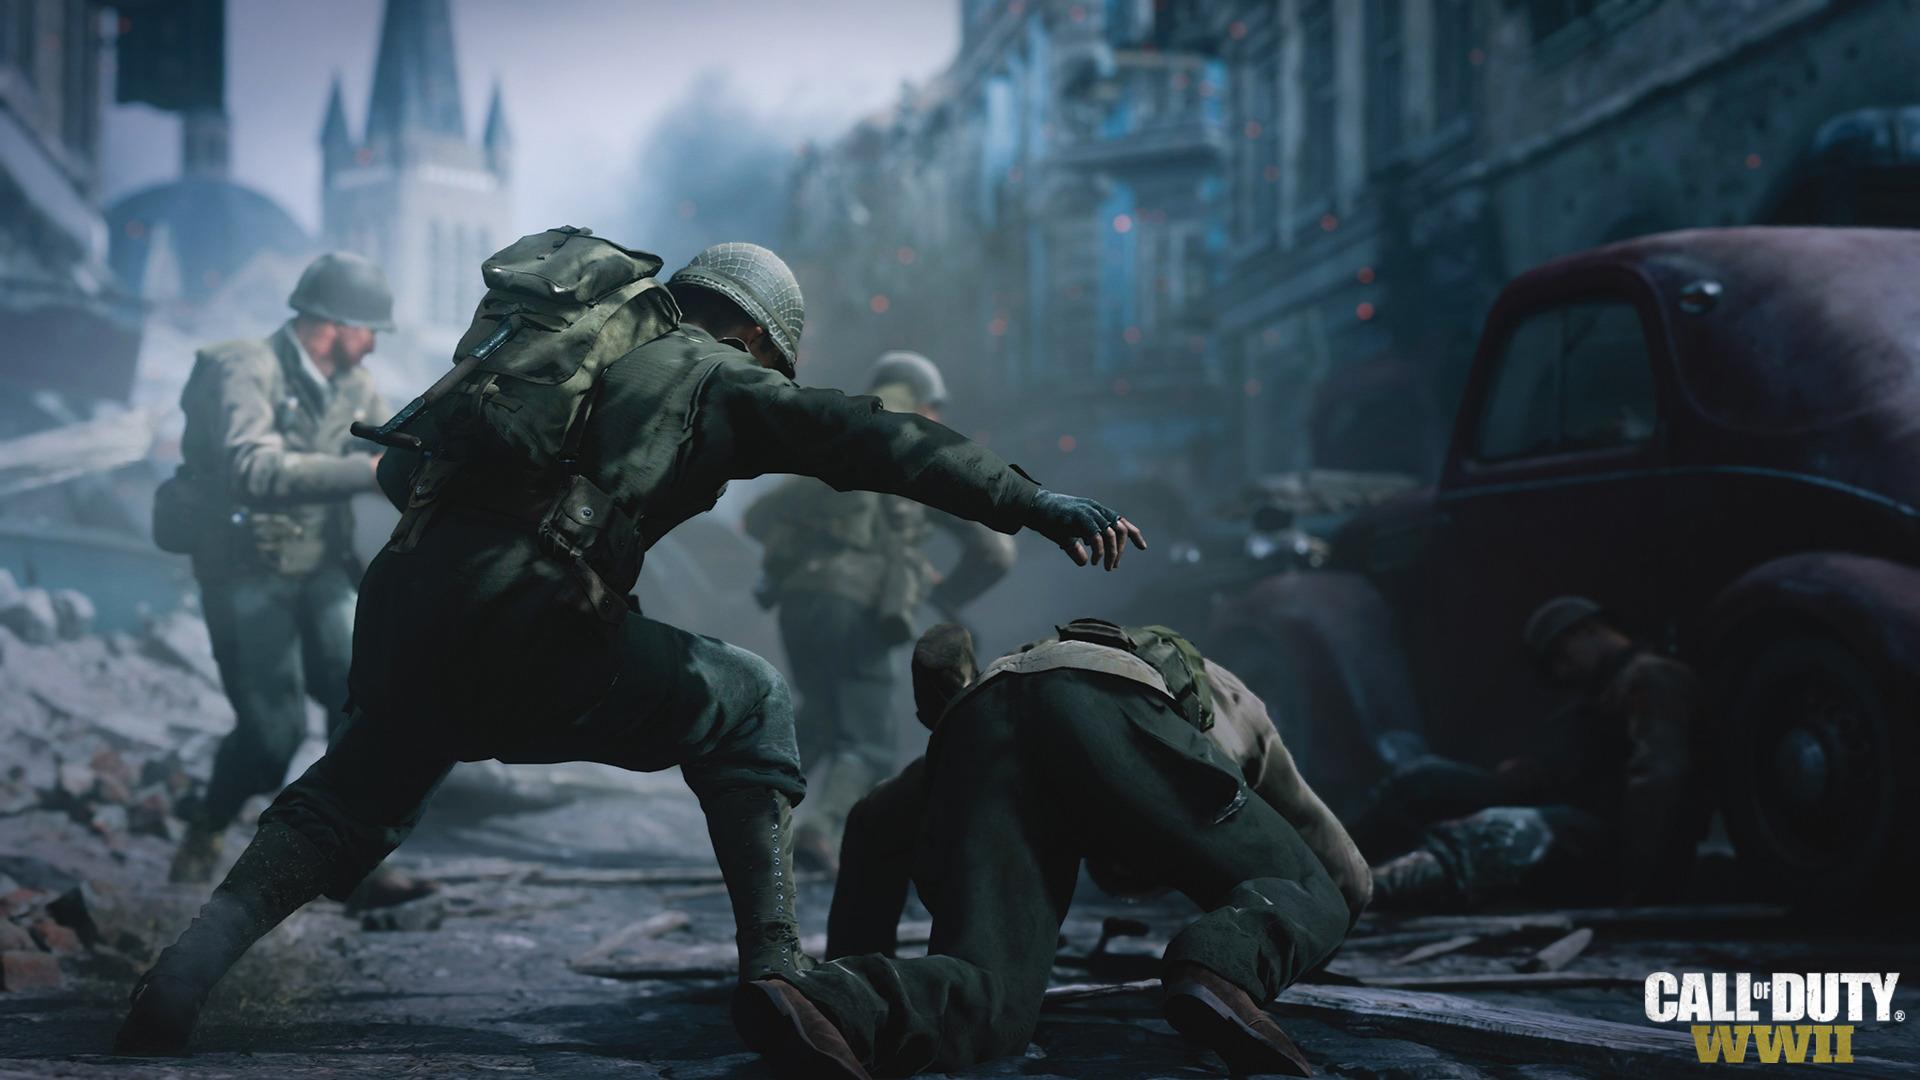 Call of Duty: WWII's campaign doesn't have a central villain